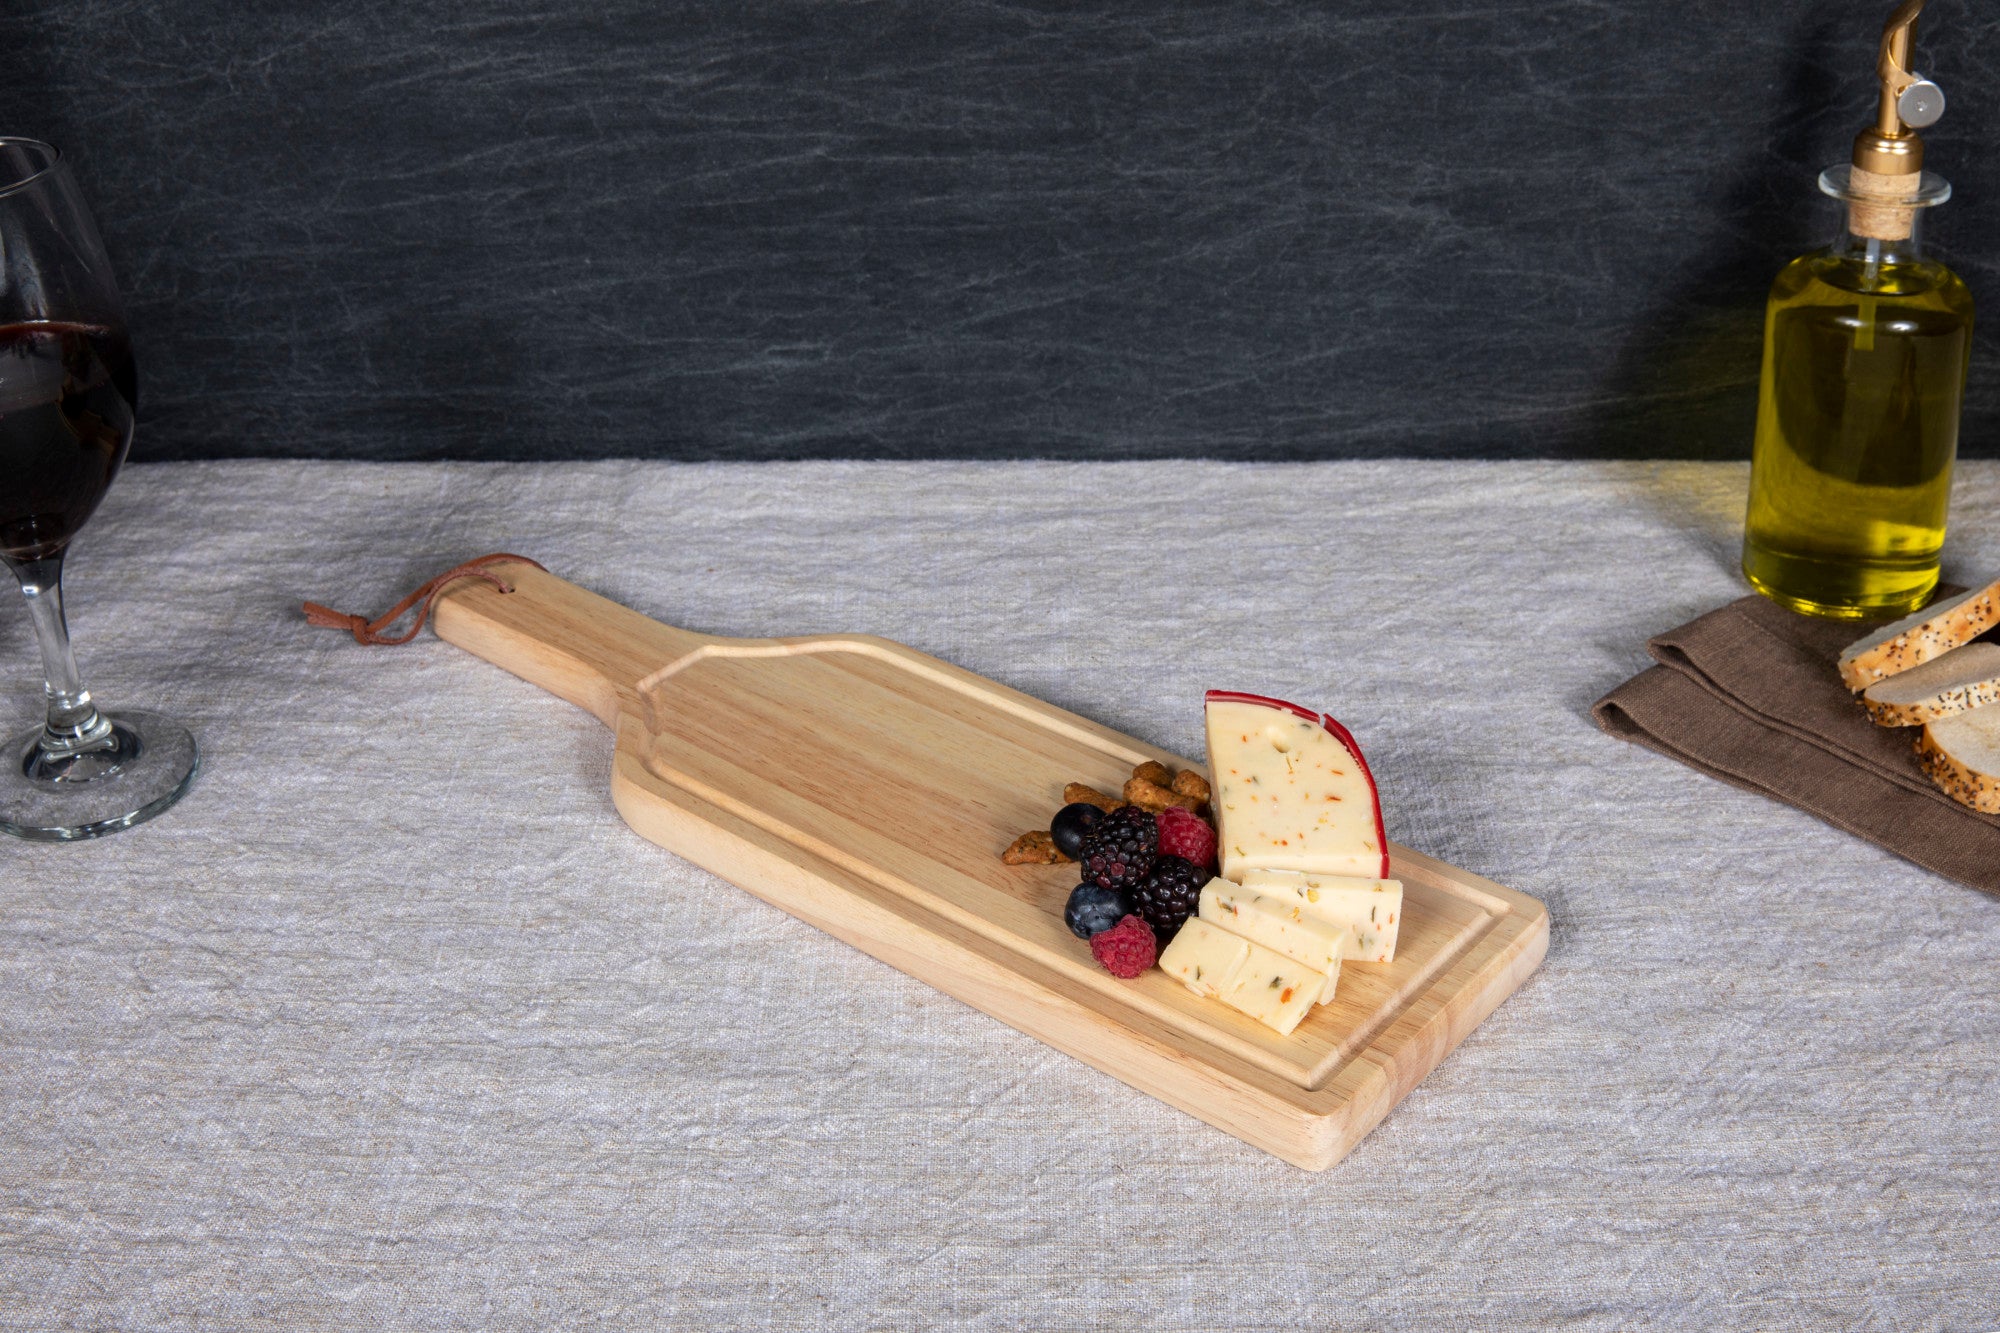 Green Bay Packers - Botella Cheese Cutting Board & Serving Tray